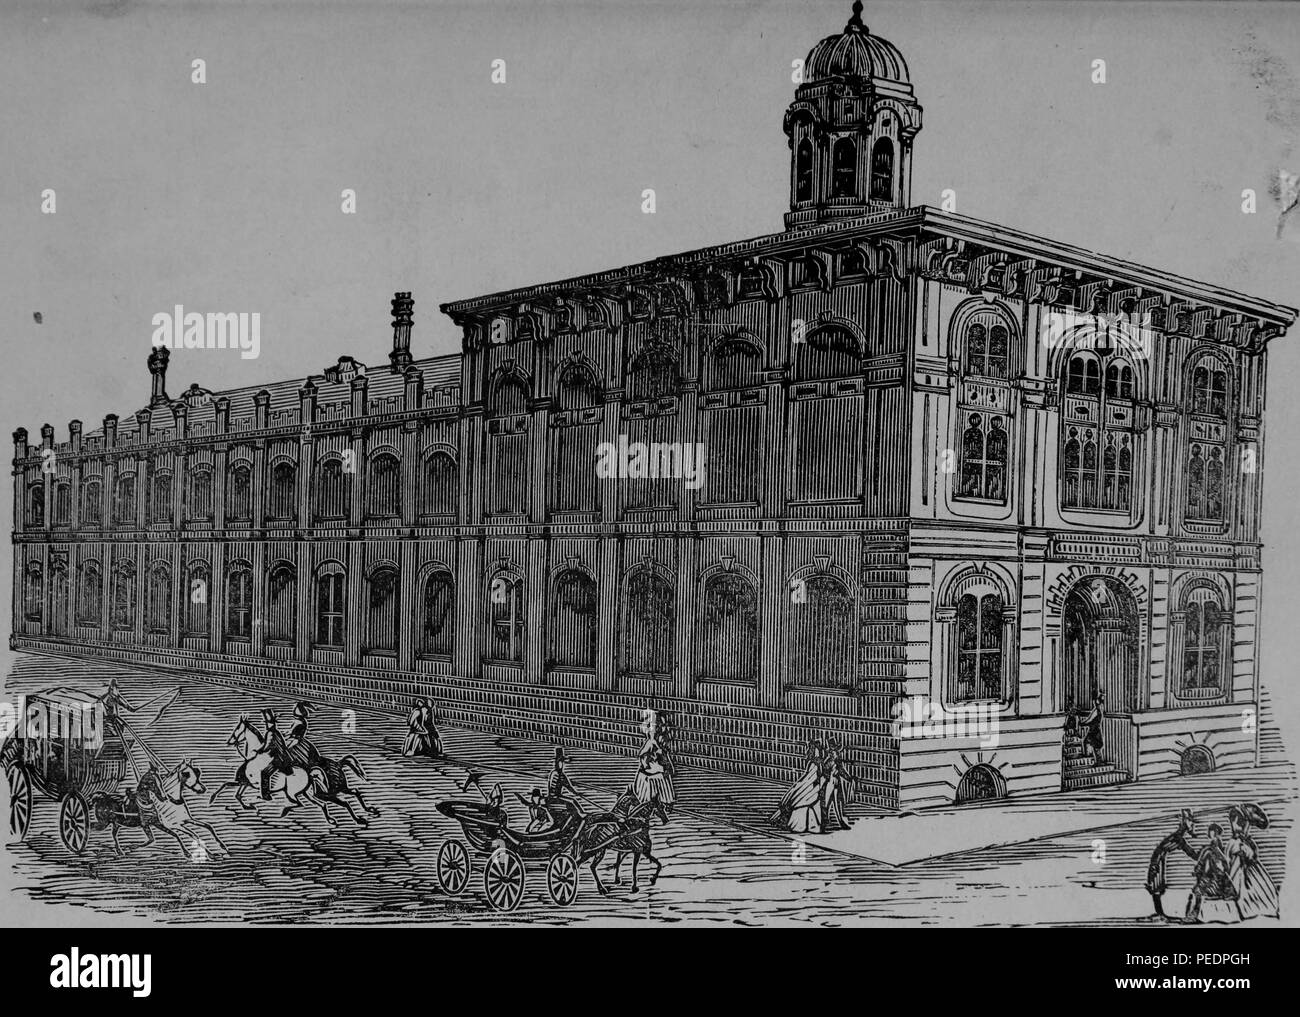 Black and white print depicting Toland Hall, with people in Victorian dress on the sidewalk in the foreground, built in the Renaissance Revival style with arched windows and a small cupola, the building was the original home of the University of California at San Francisco, and housed the Medical Department before it moved to the Parnassus campus, published in the 'Annual Announcement of Lectures at Toland Hall, Medical Department of the University of California, San Francisco, California', 1878. Courtesy Internet Archive. () Stock Photo